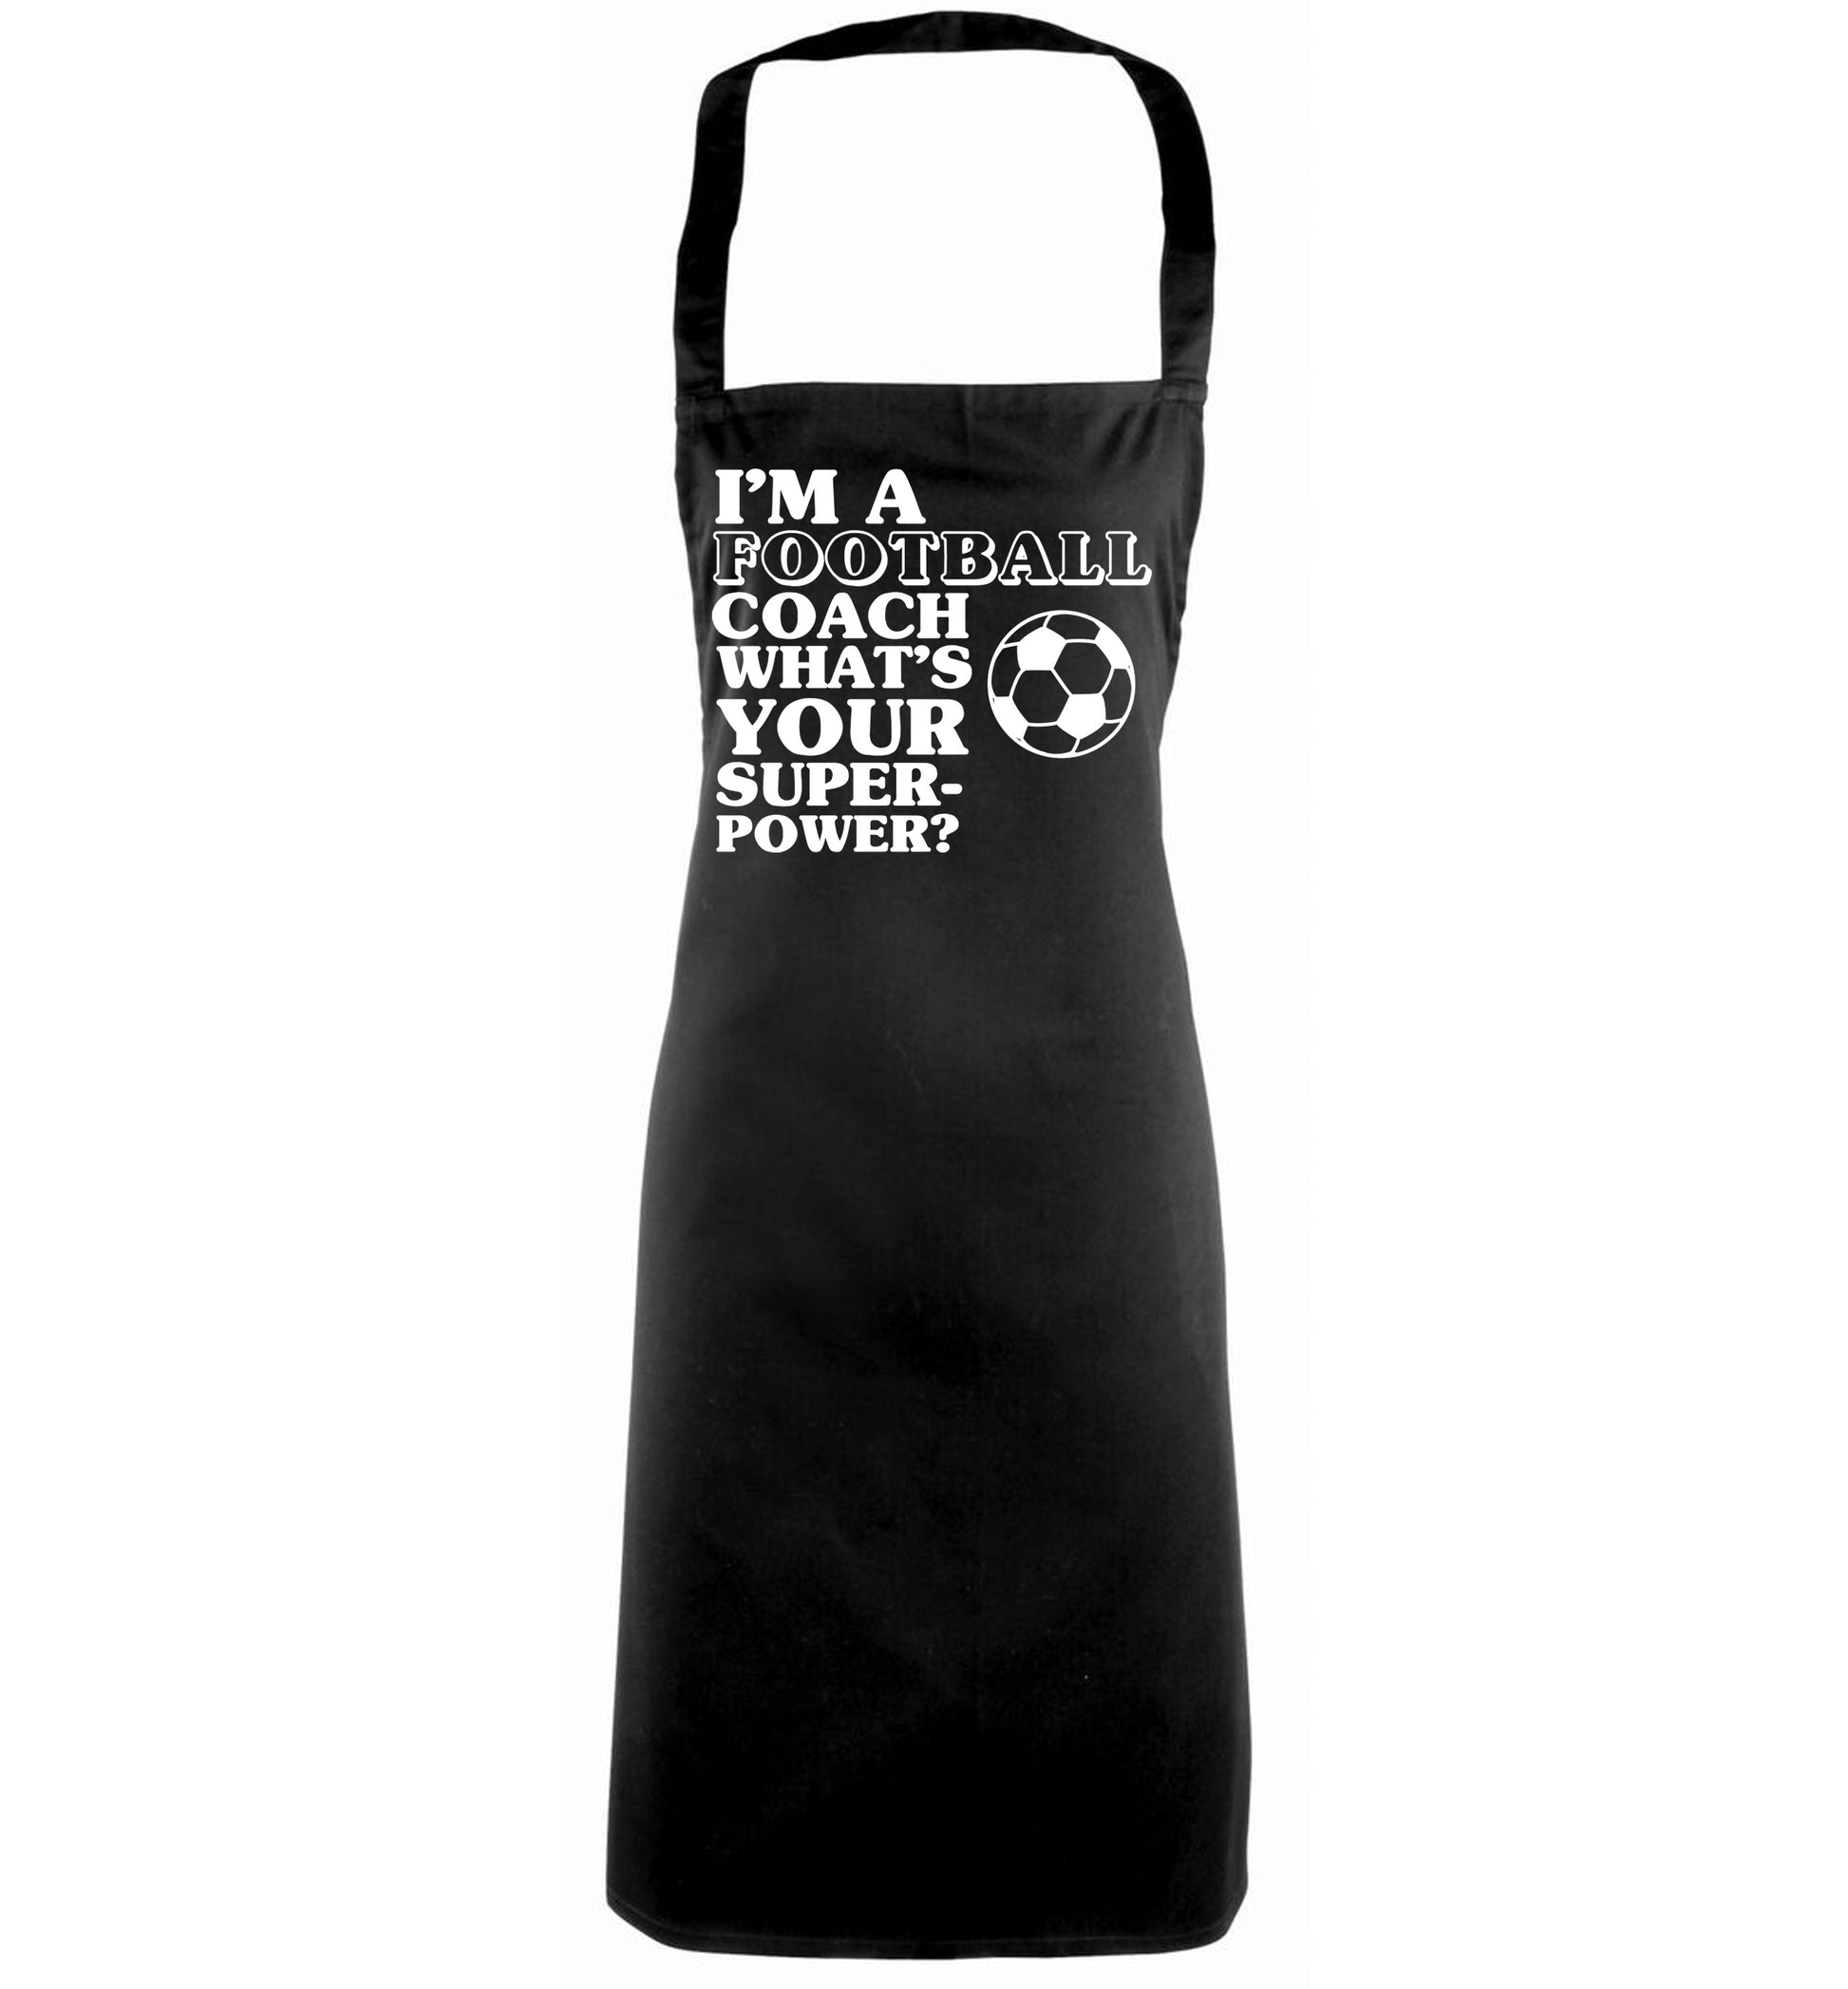 I'm a football coach what's your superpower? black apron